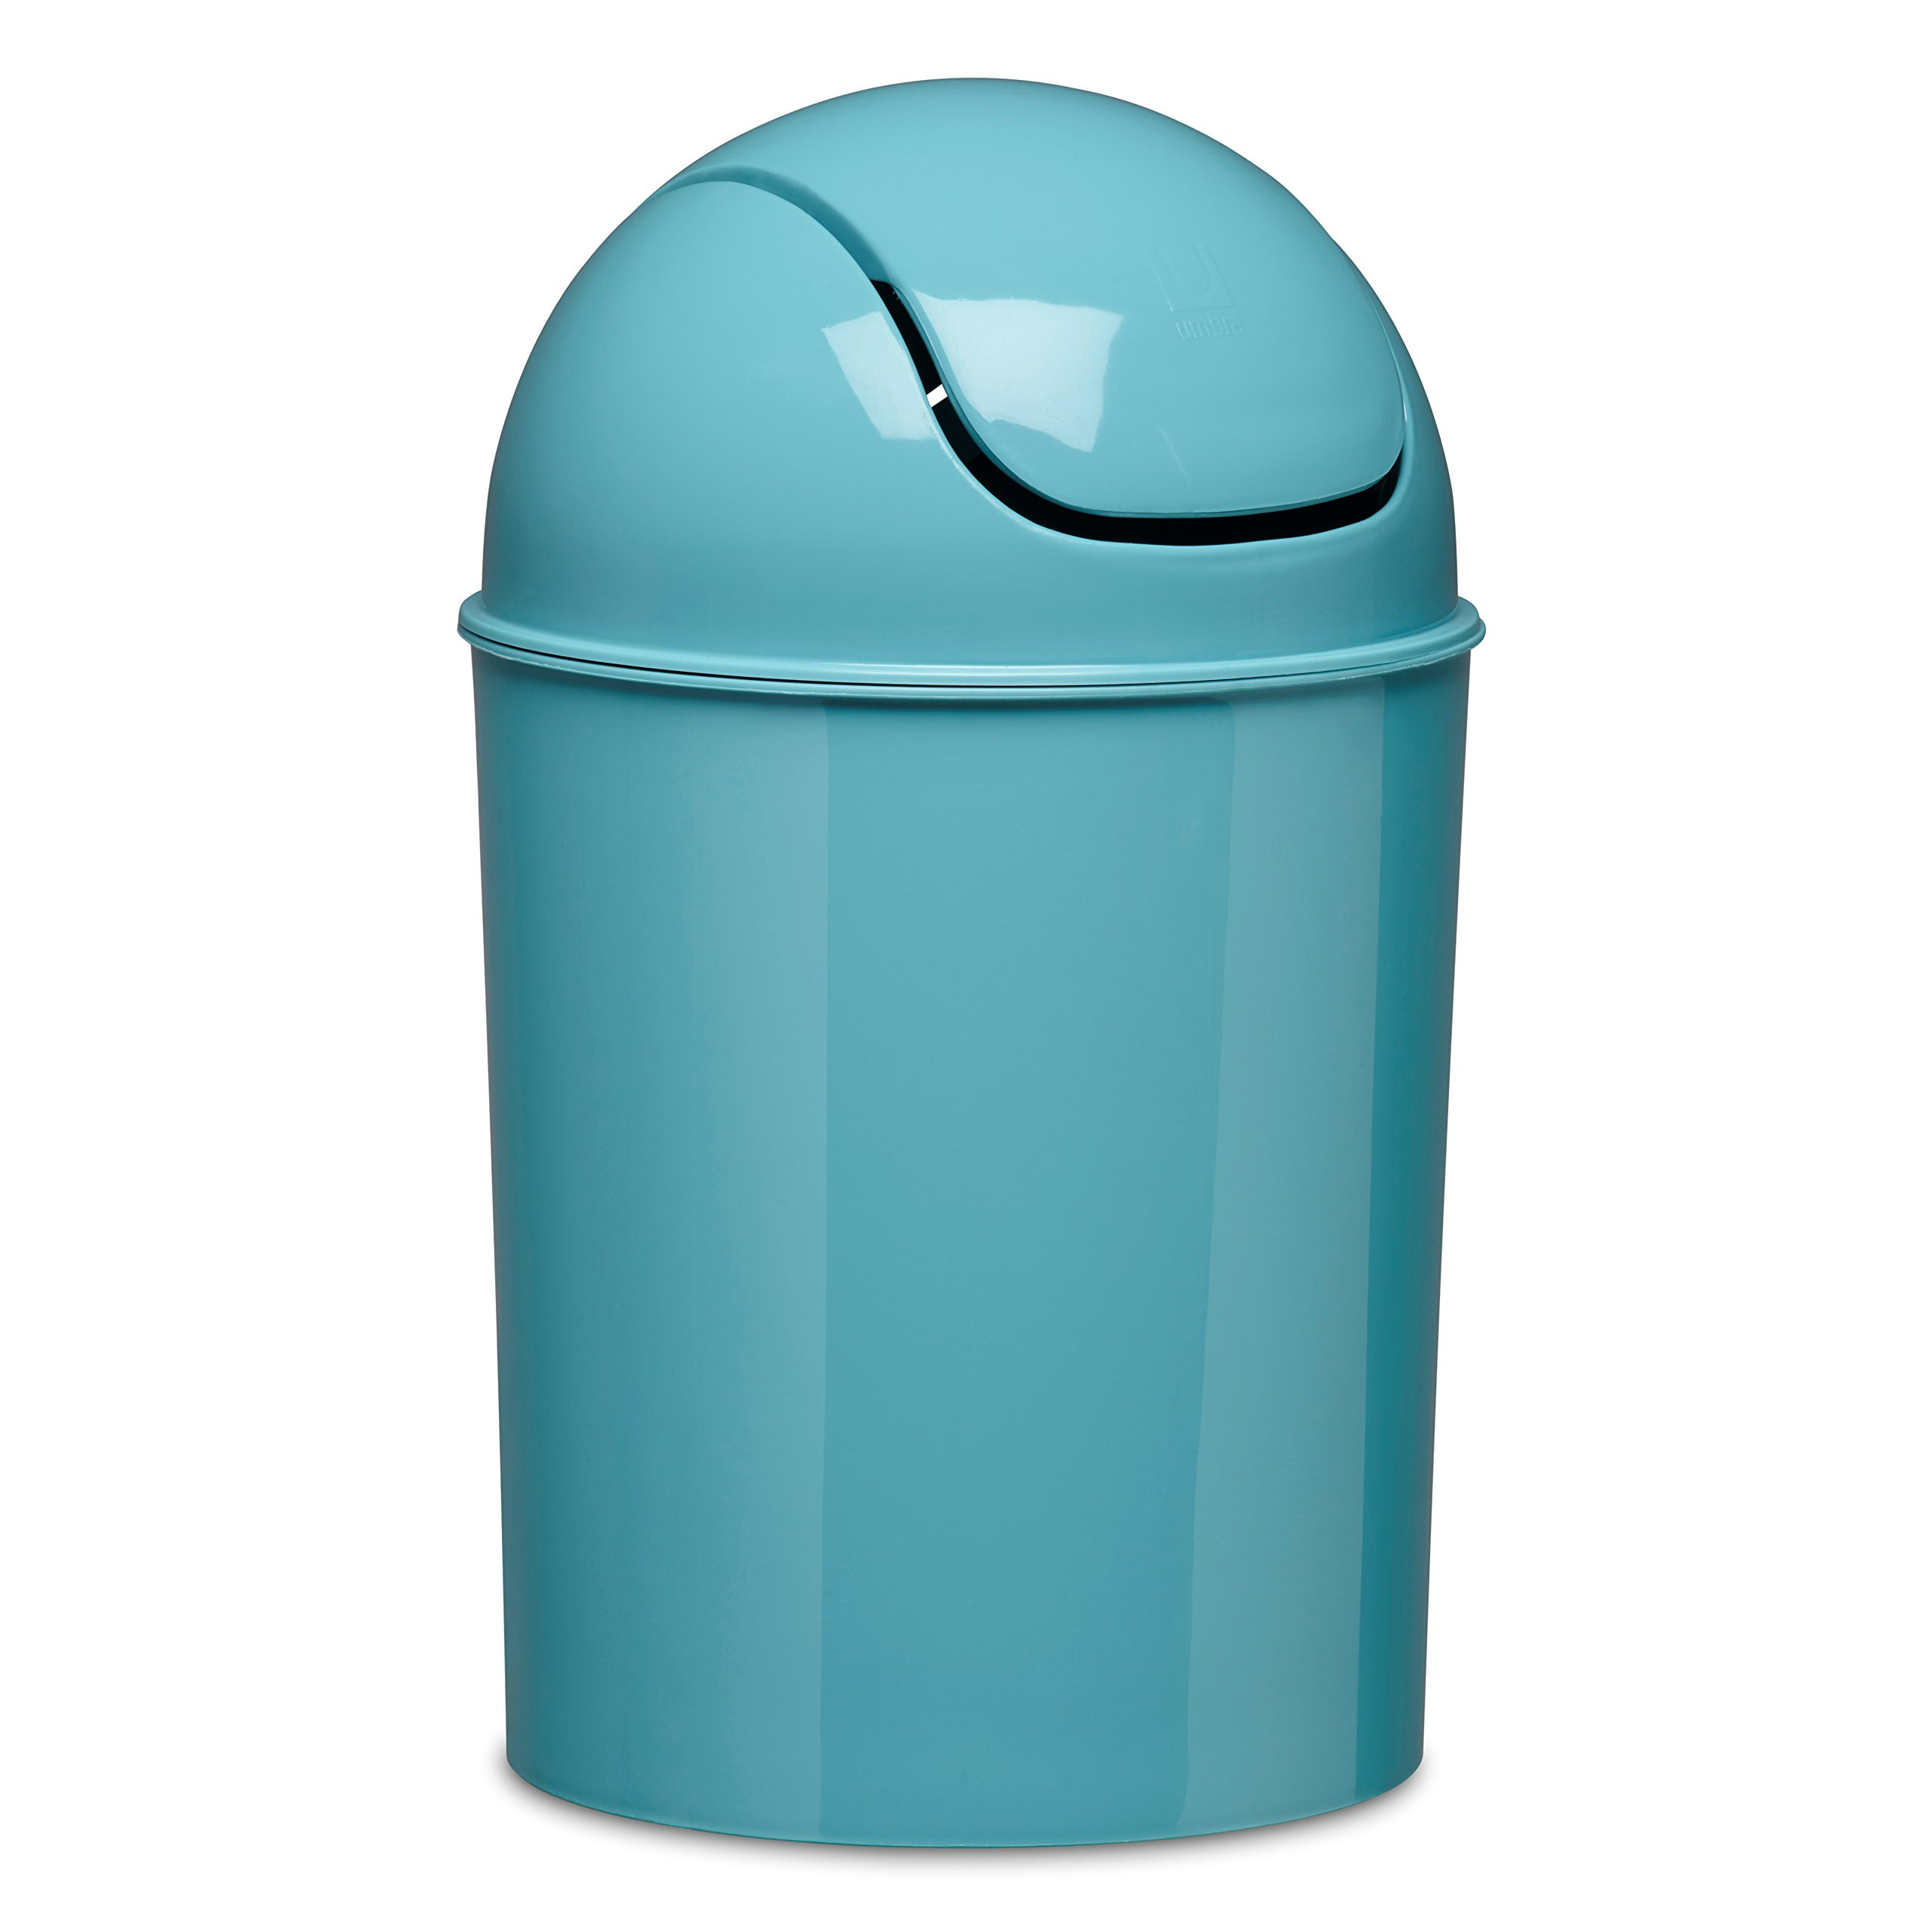 Small Bathroom Garbage Cans
 Waste Garbage Basket Trash Can For Bathroom with Swing Lid